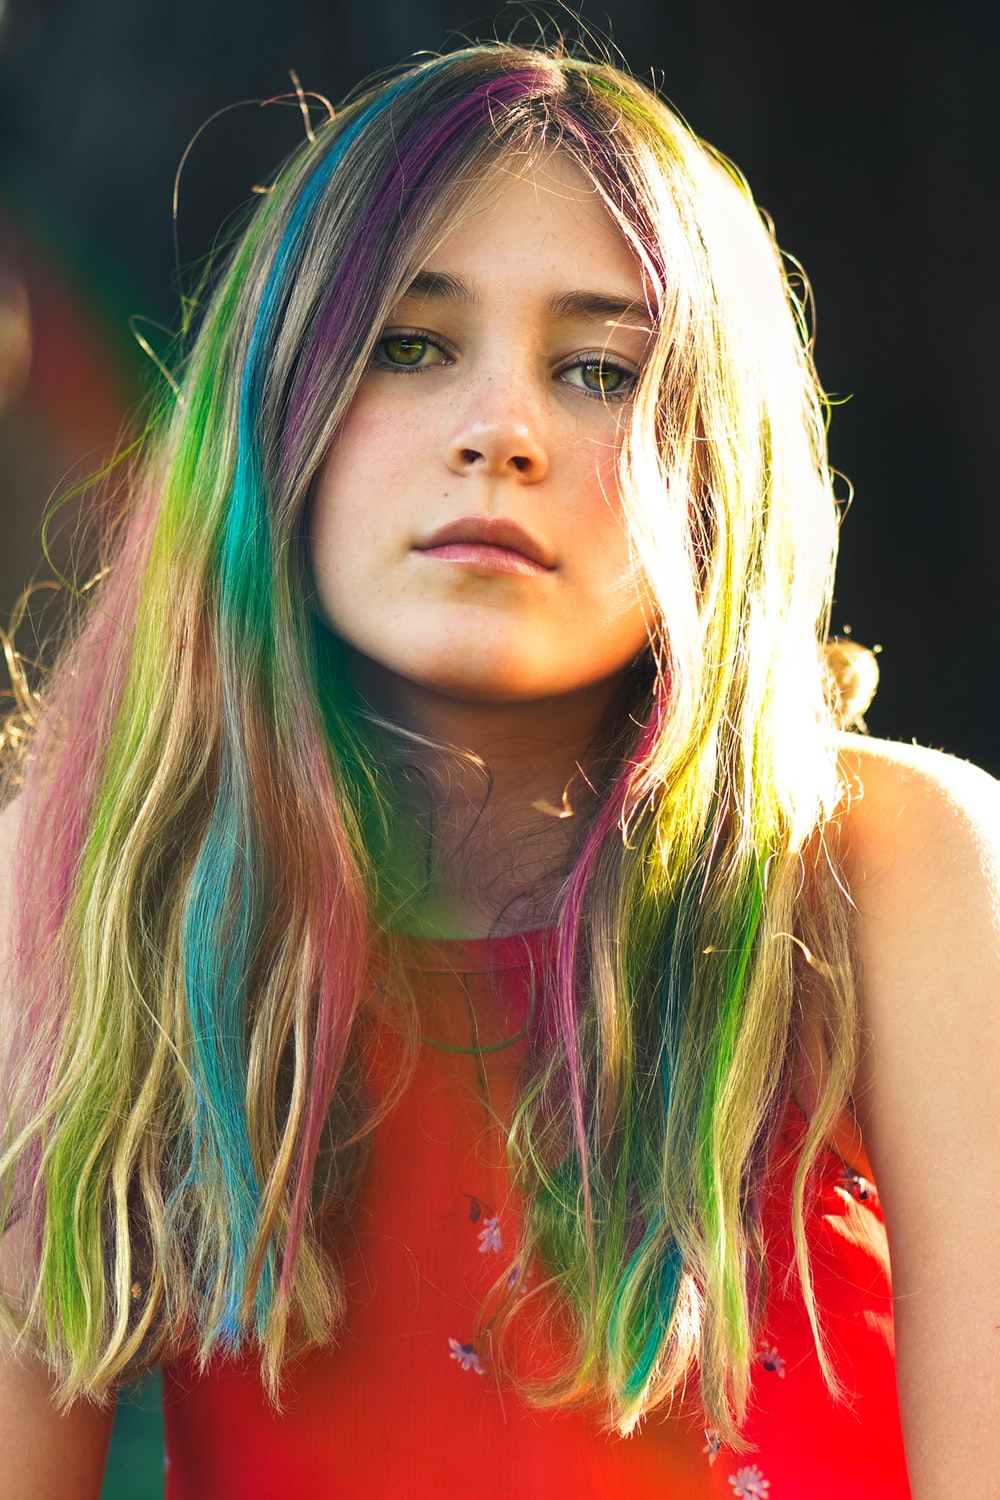 Rainbow Girl Picture. Download Free Image